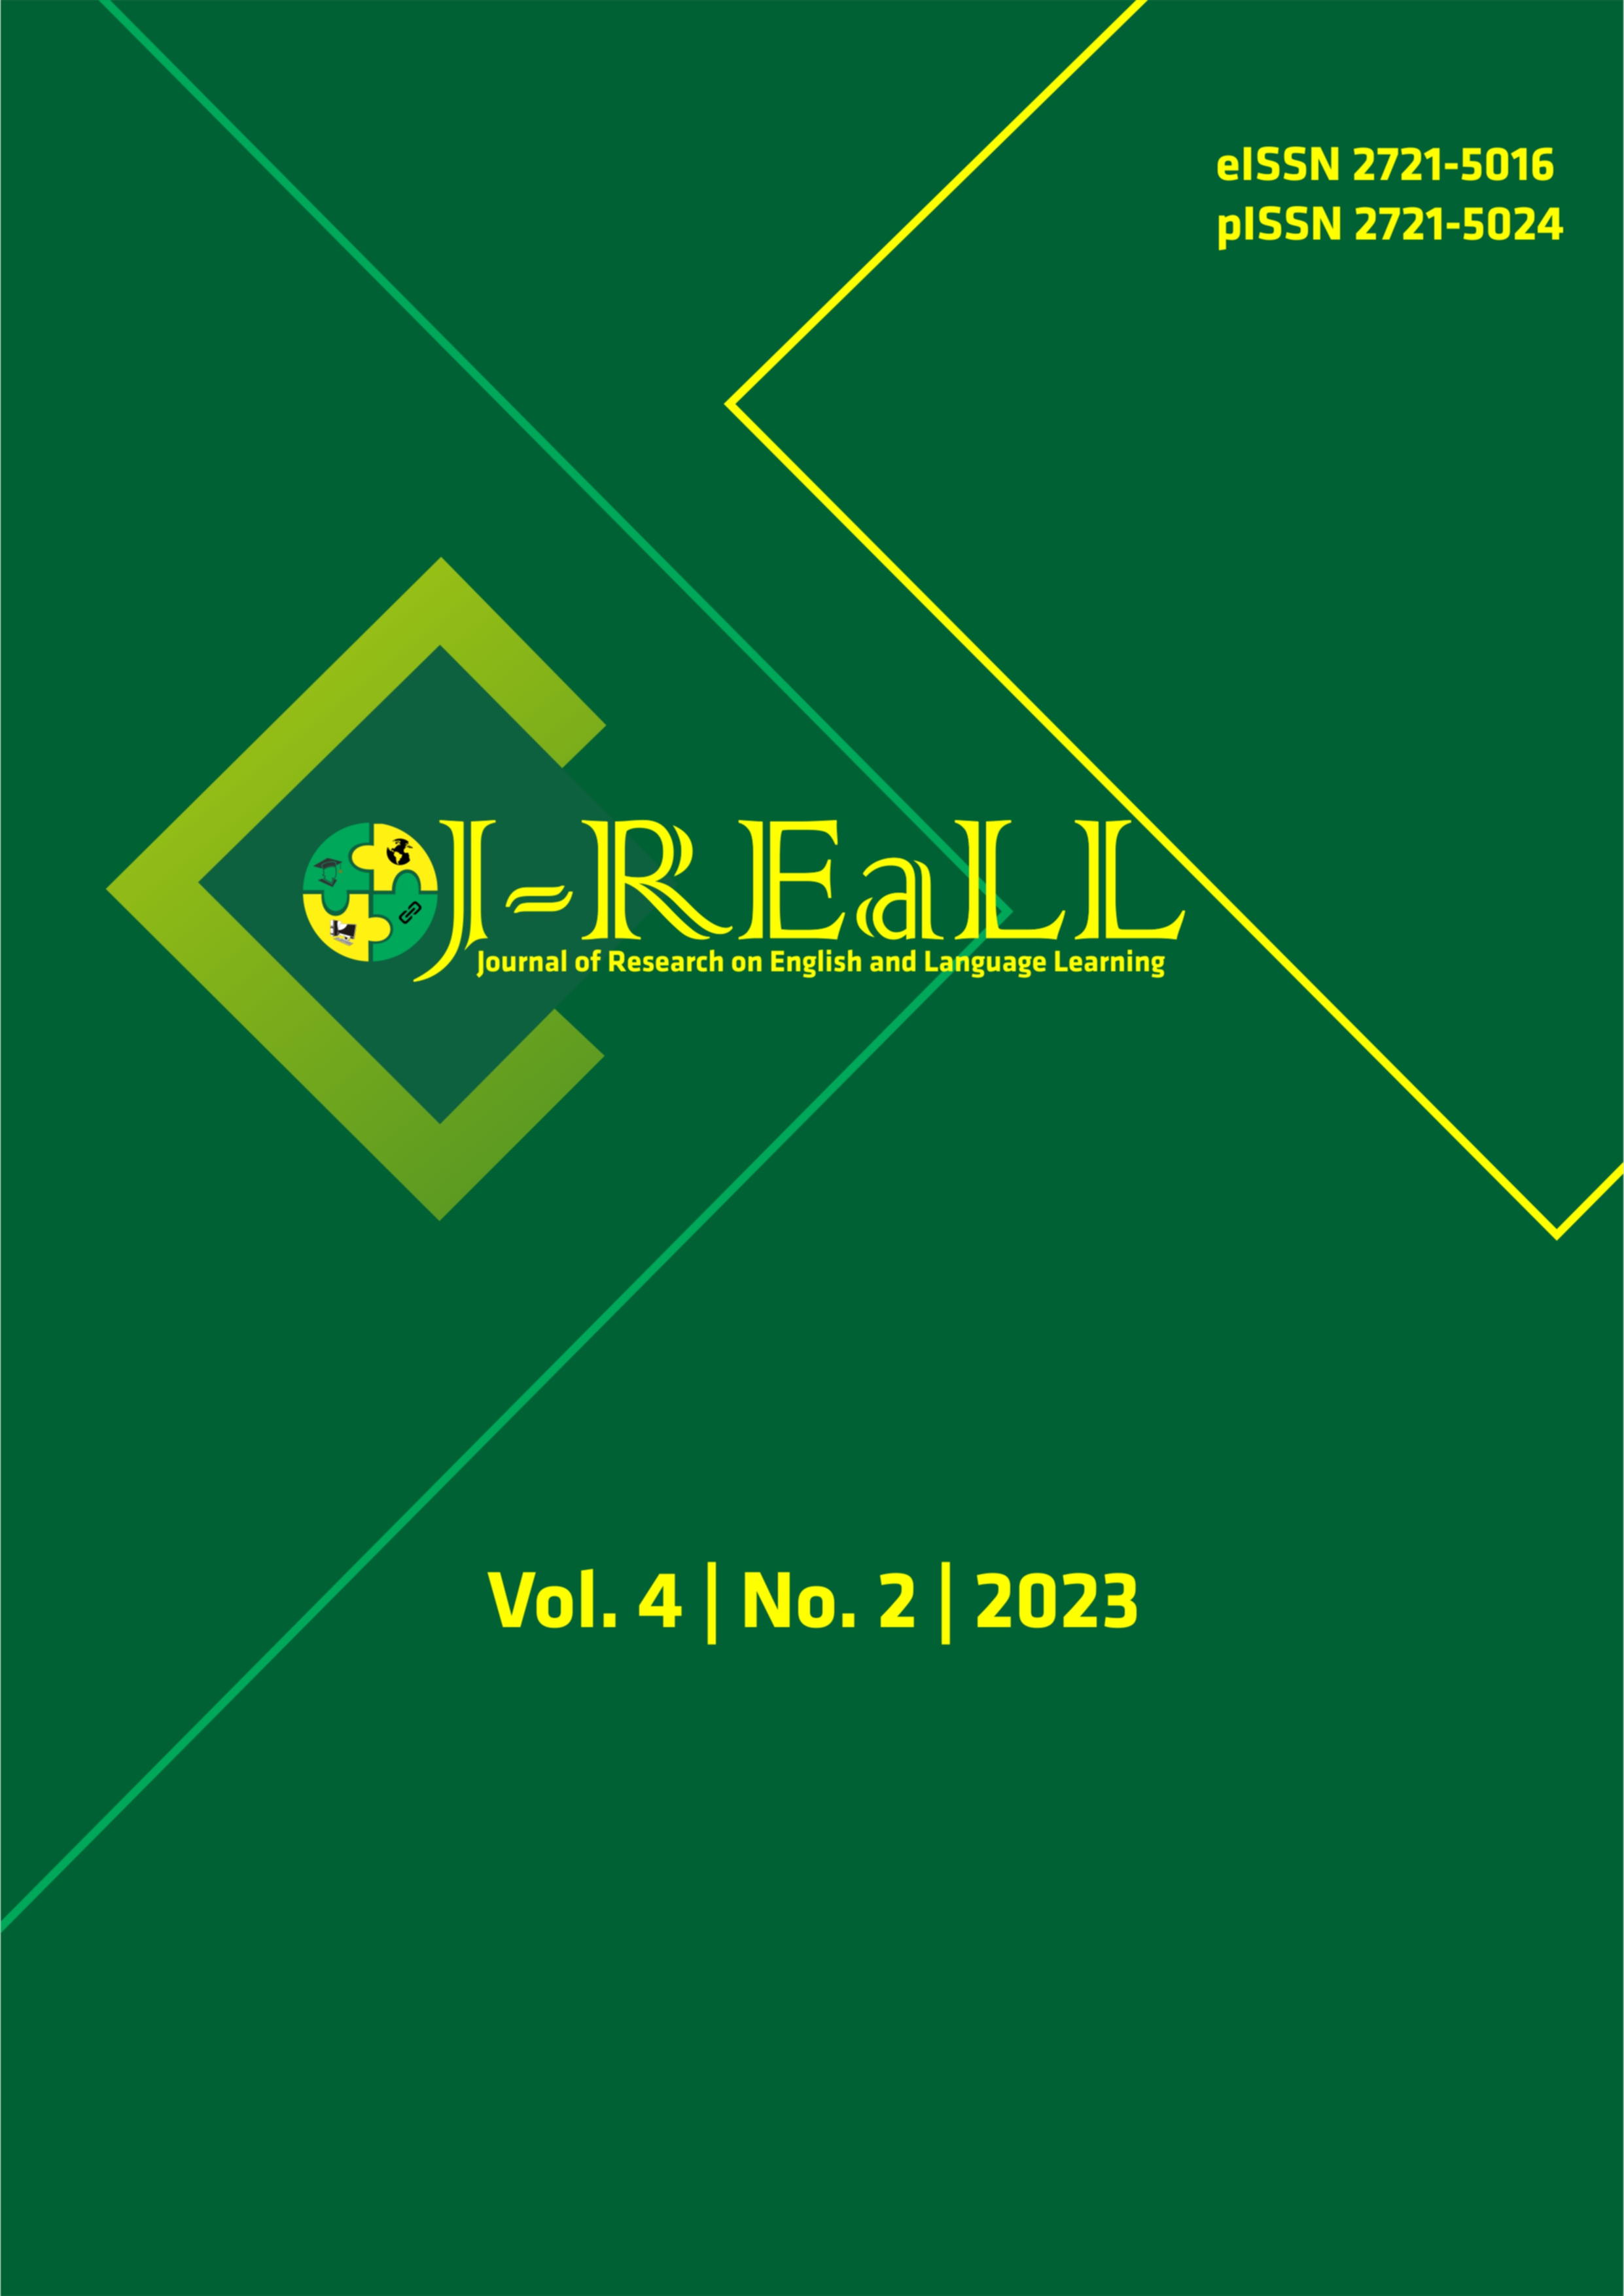 					View Vol. 4 No. 2 (2023): Journal of Research on English and Language Learning (J-REaLL)
				